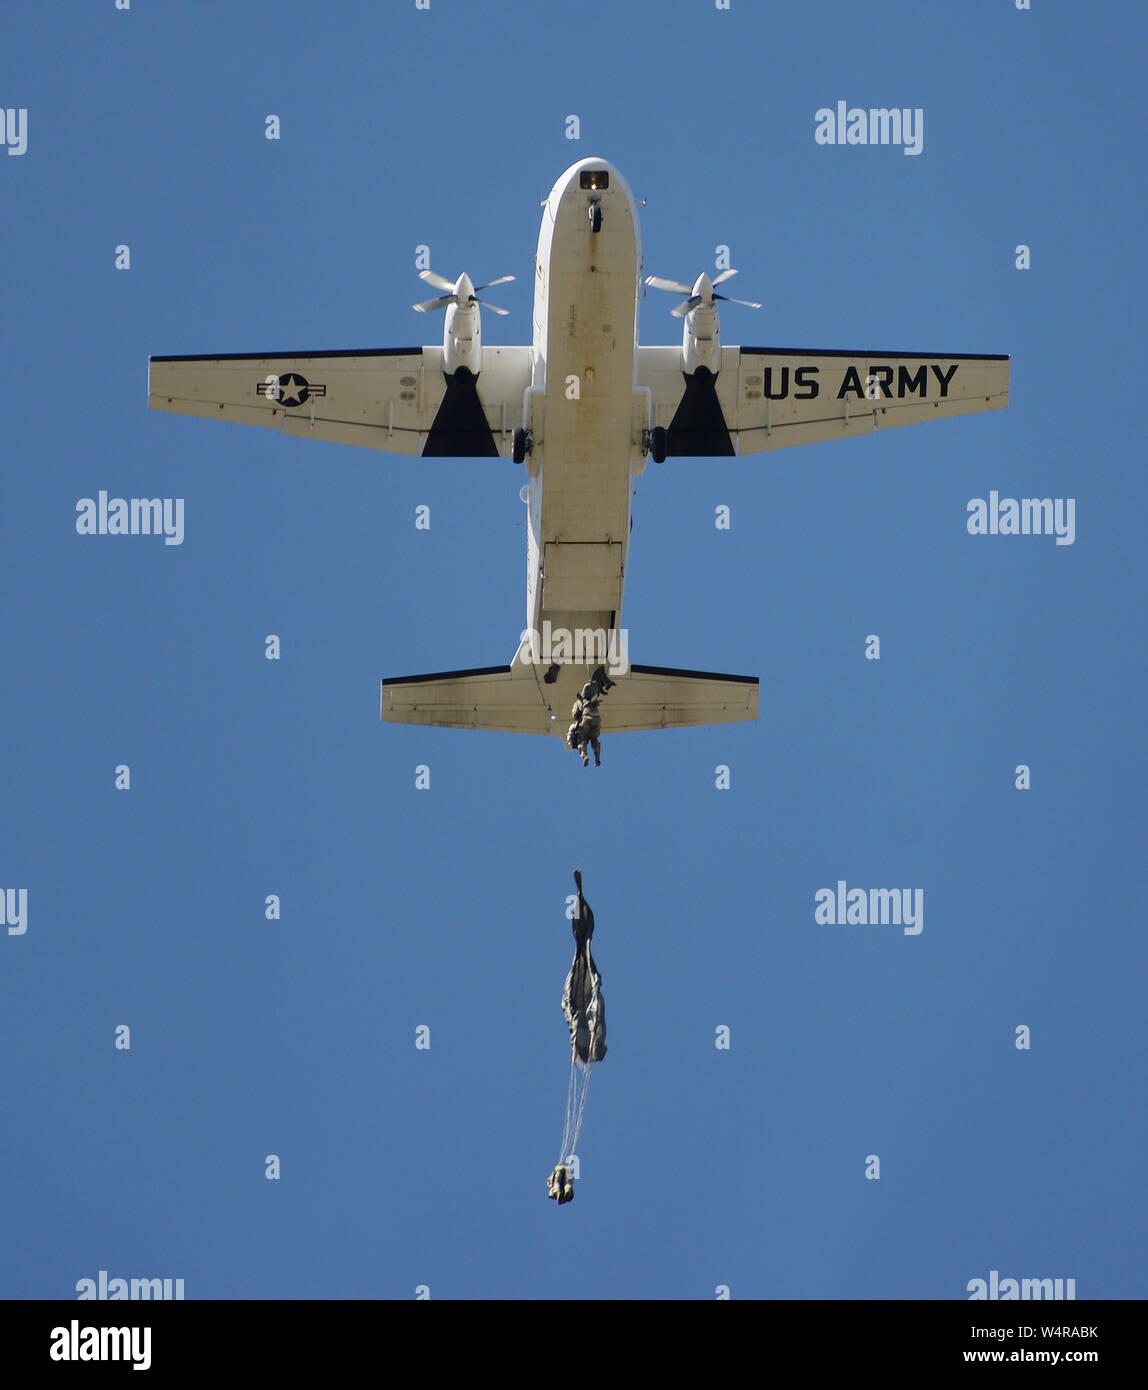 Soldiers from the U.S. Army John F. Kennedy Special Warfare Center and School and 3rd Special Forces Group (Airborne) jump from a CASA C-212 Aviocar over Laurinburg-Maxton Airfield March 28, 2019. The Soldiers completed an all-female pass to pay homage to the rich history of women in the U.S. Army. (U.S. Army photo by K. Kassens) Stock Photo